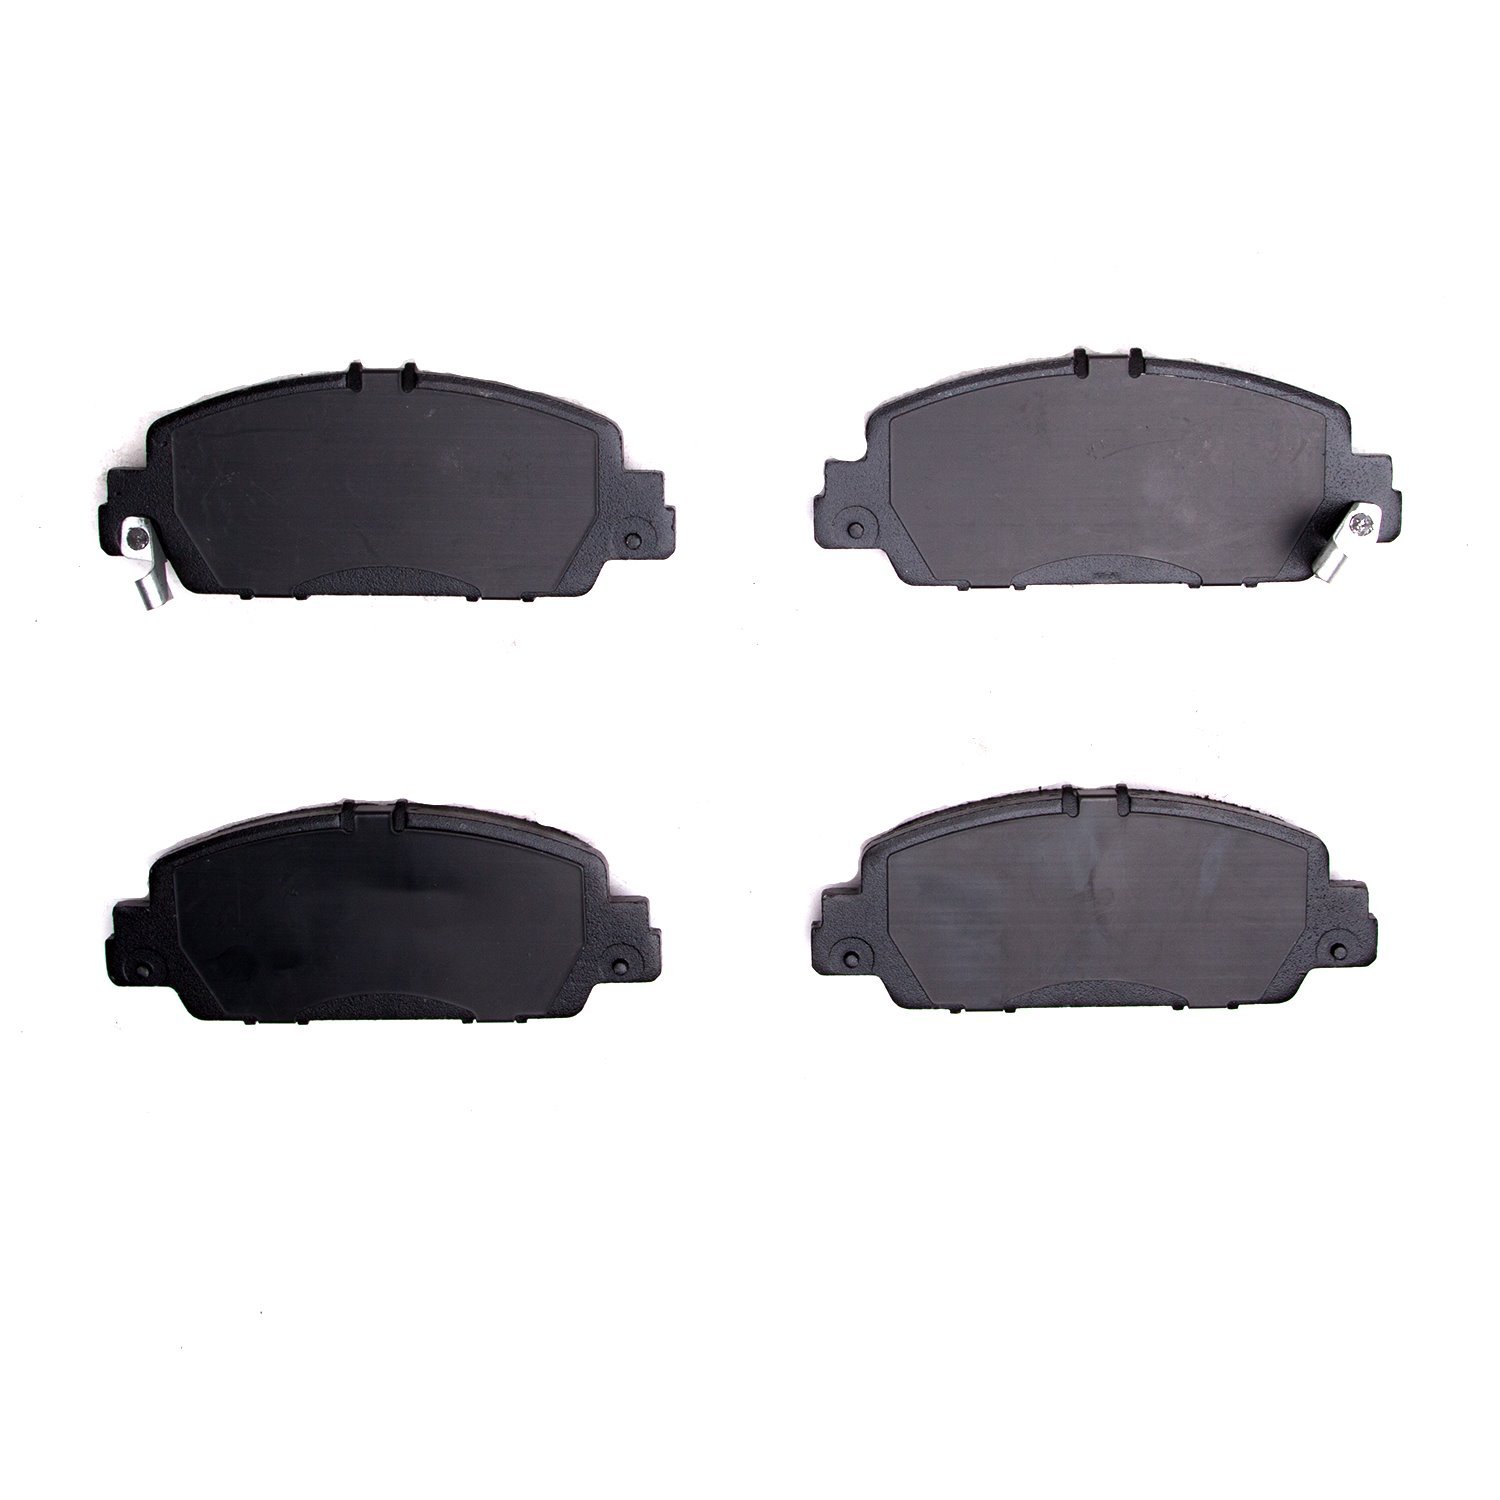 1552-1654-00 5000 Advanced Ceramic Brake Pads, Fits Select Acura/Honda, Position: Front